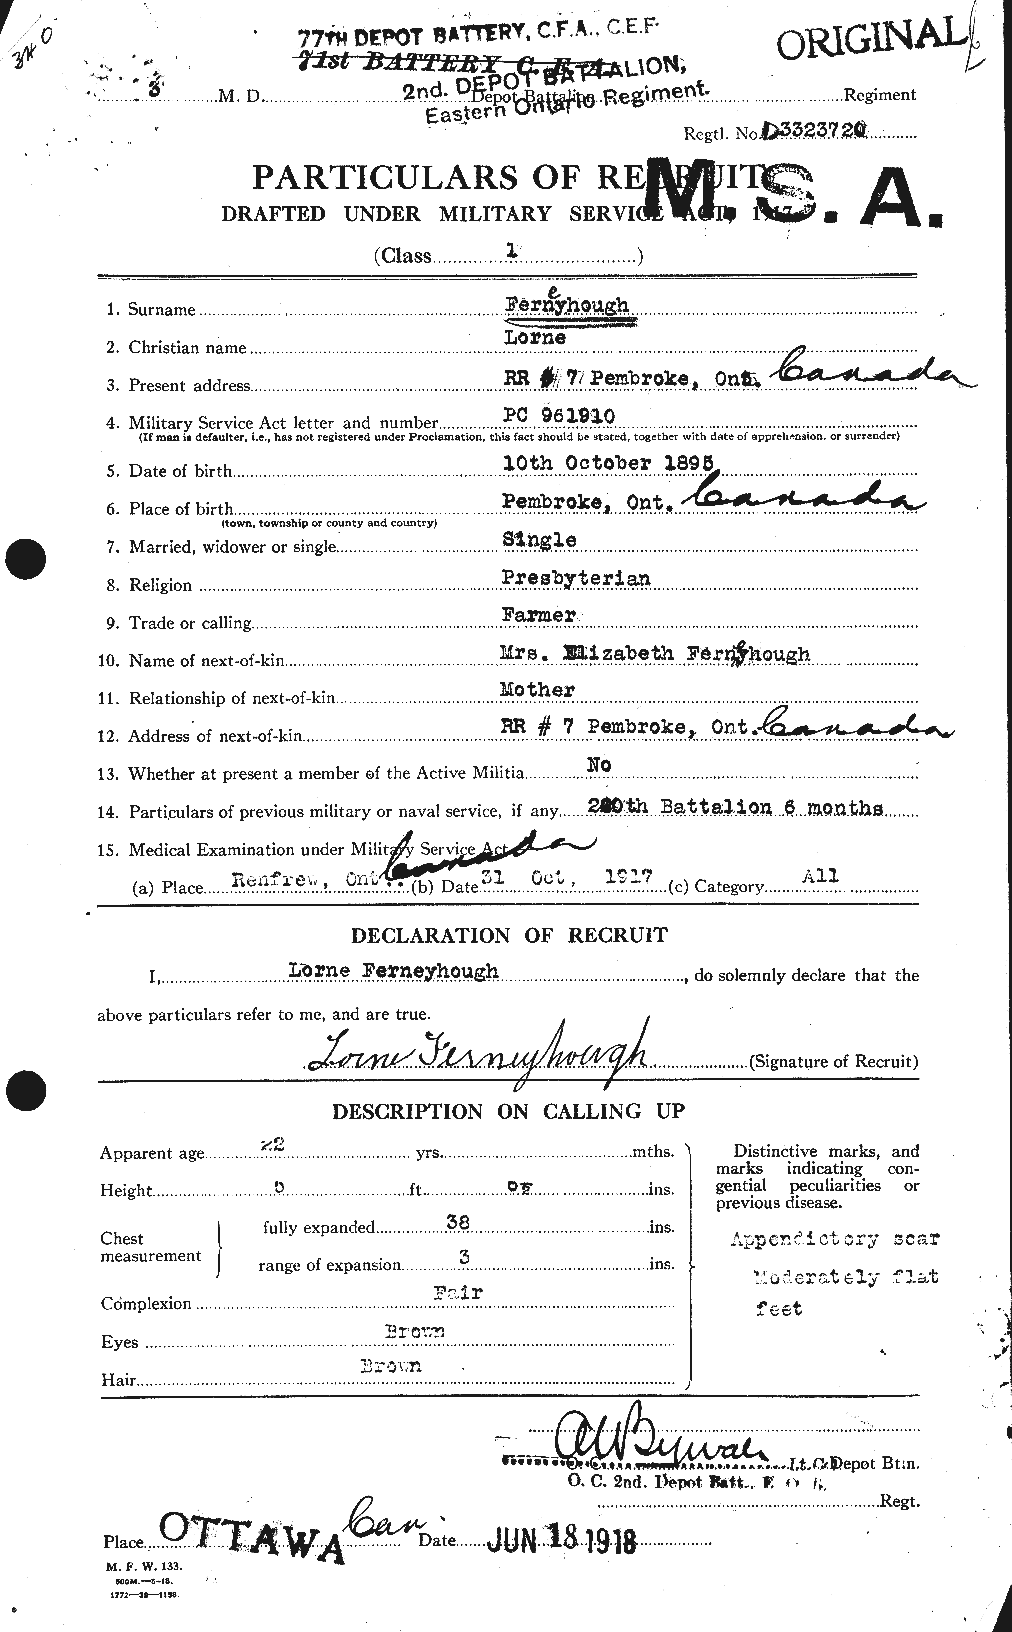 Personnel Records of the First World War - CEF 323582a